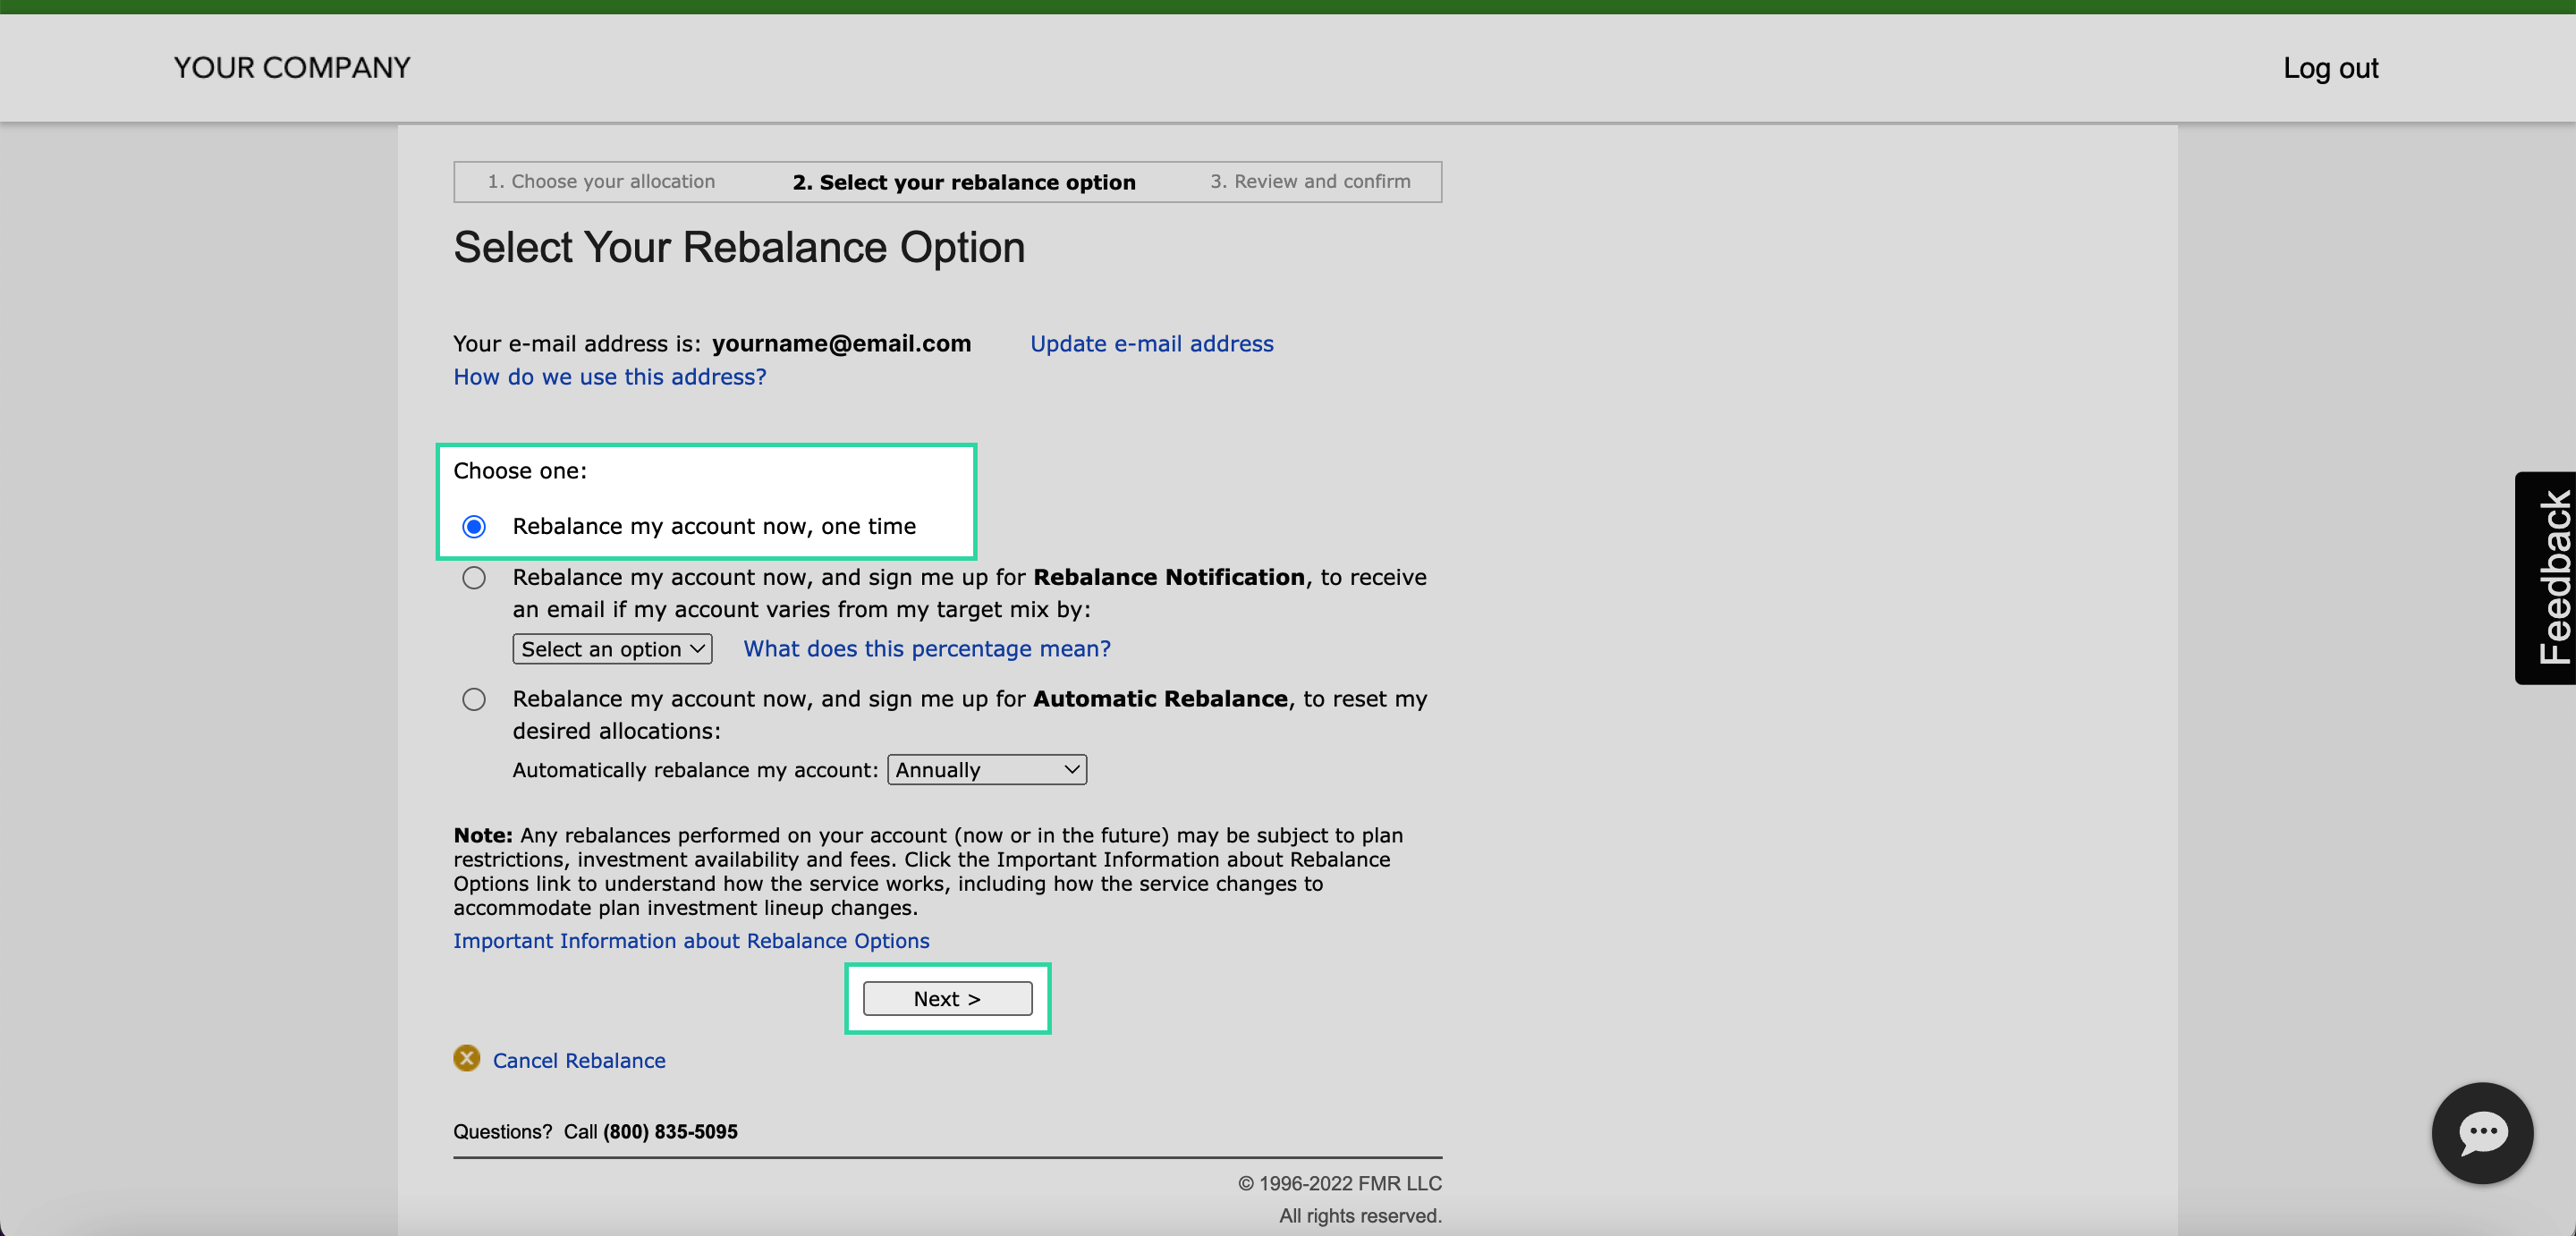 On the “Select Your Rebalance Option” page, choose “Rebalance my account now, one time”.  Click on “Next”.